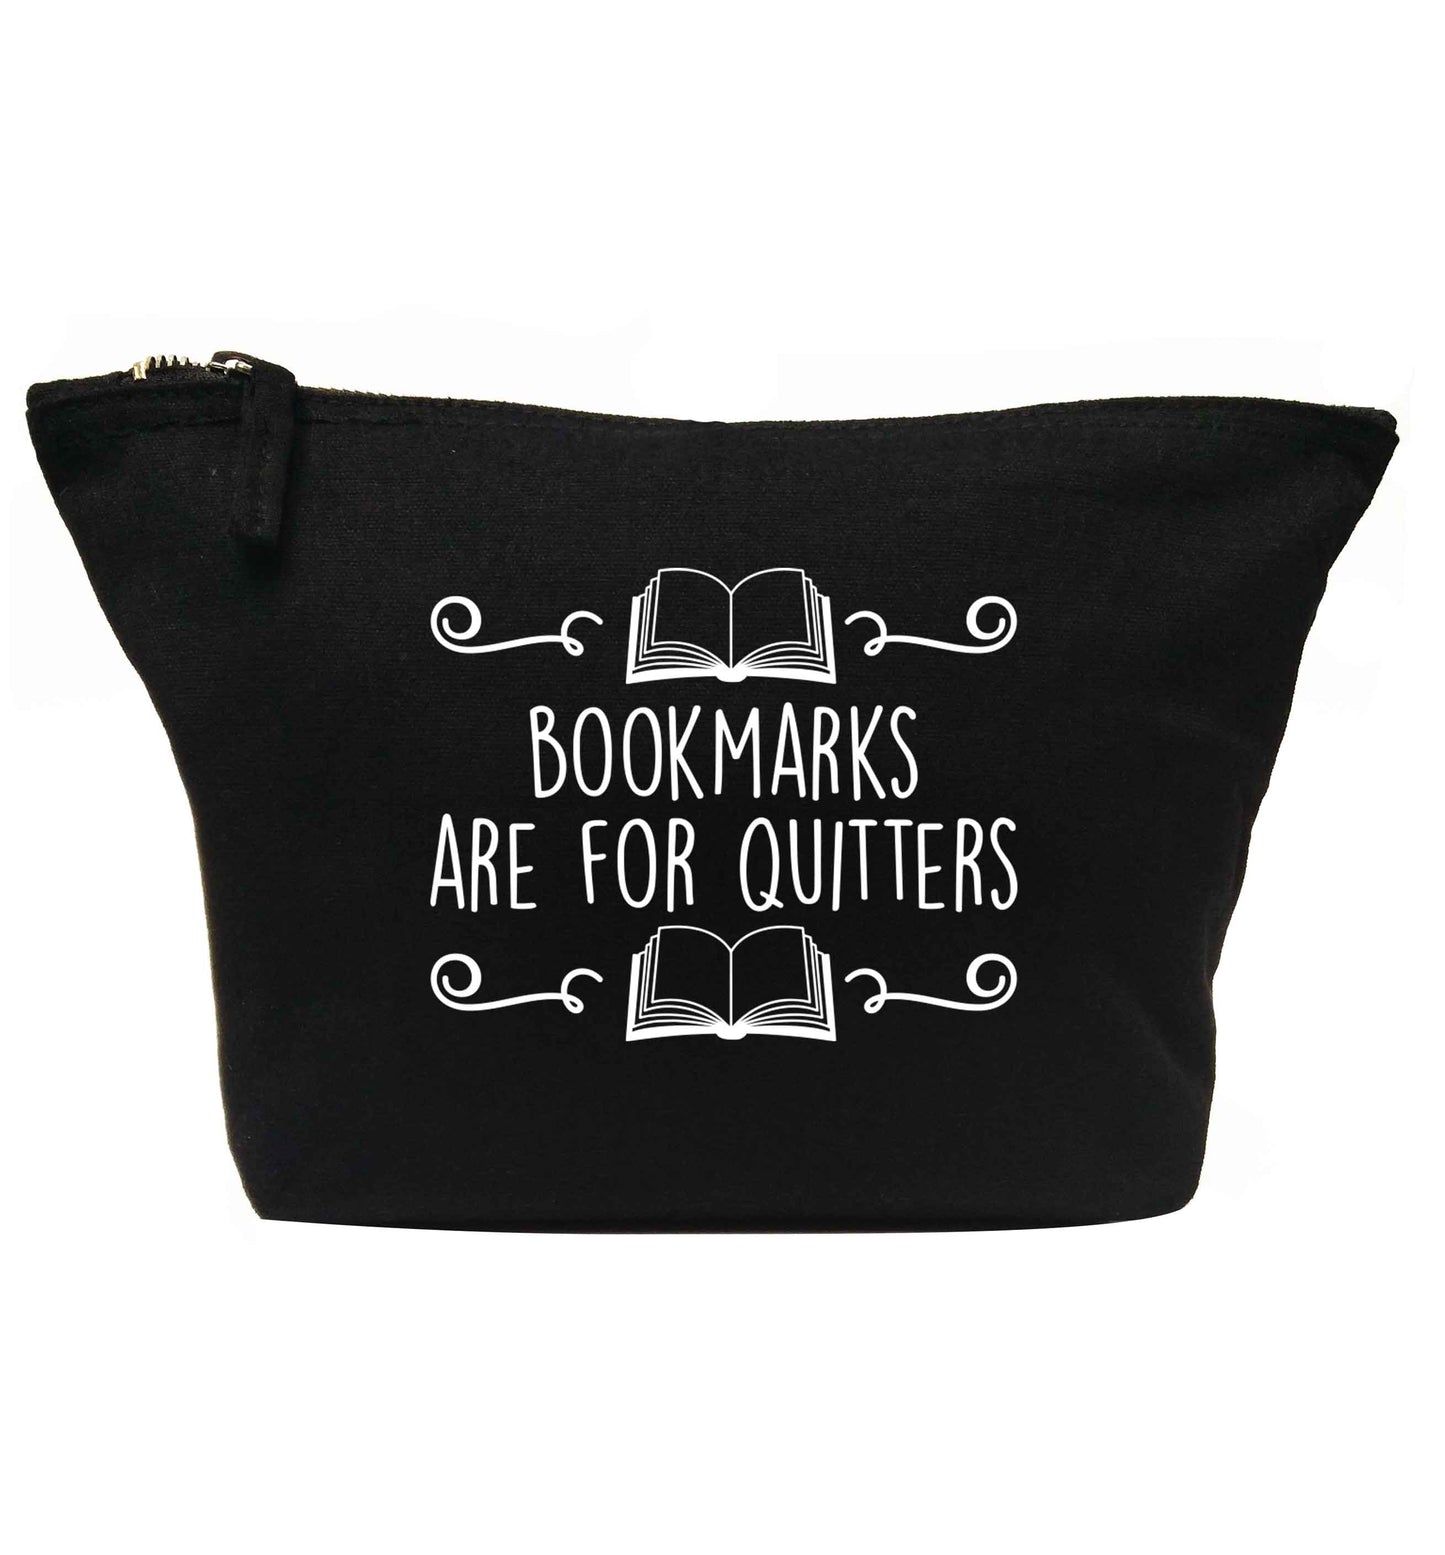 Bookmarks are for quitters | Makeup / wash bag